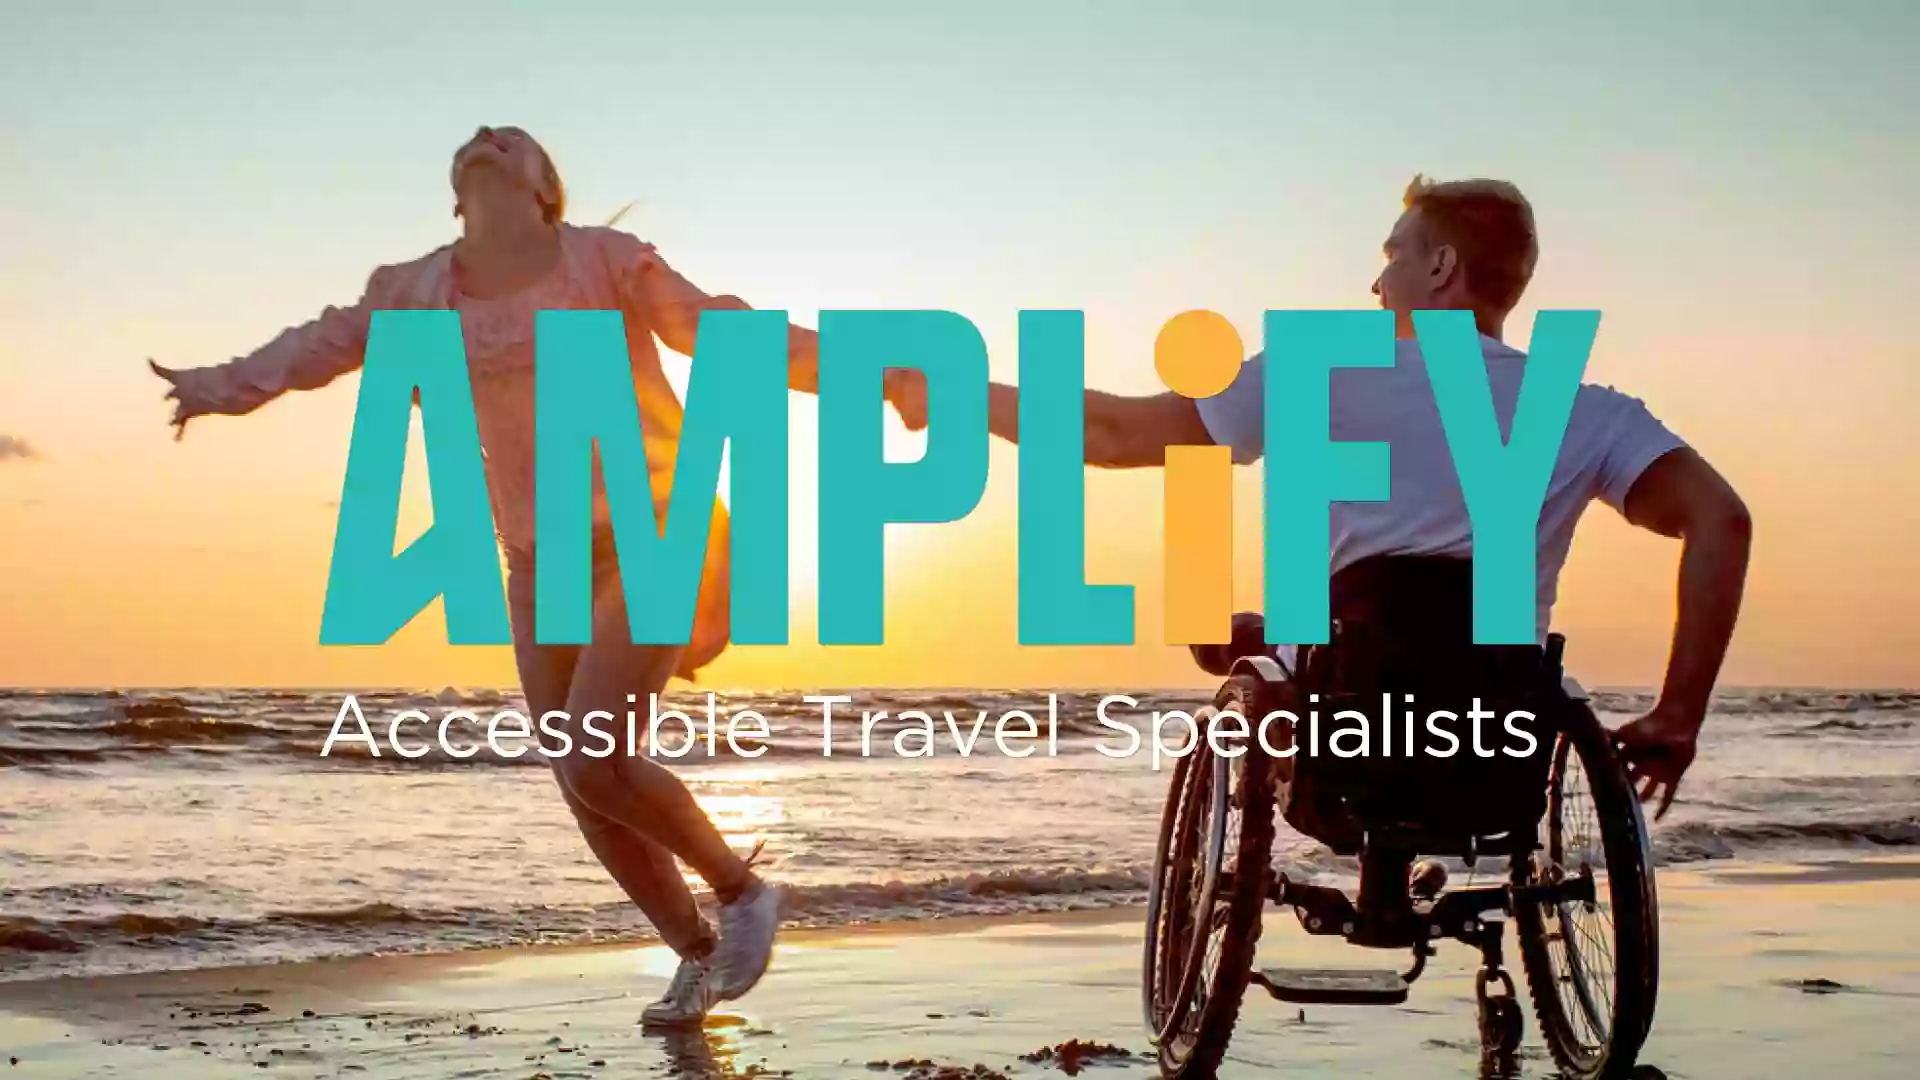 Amplify - Accessible Travel Specialists